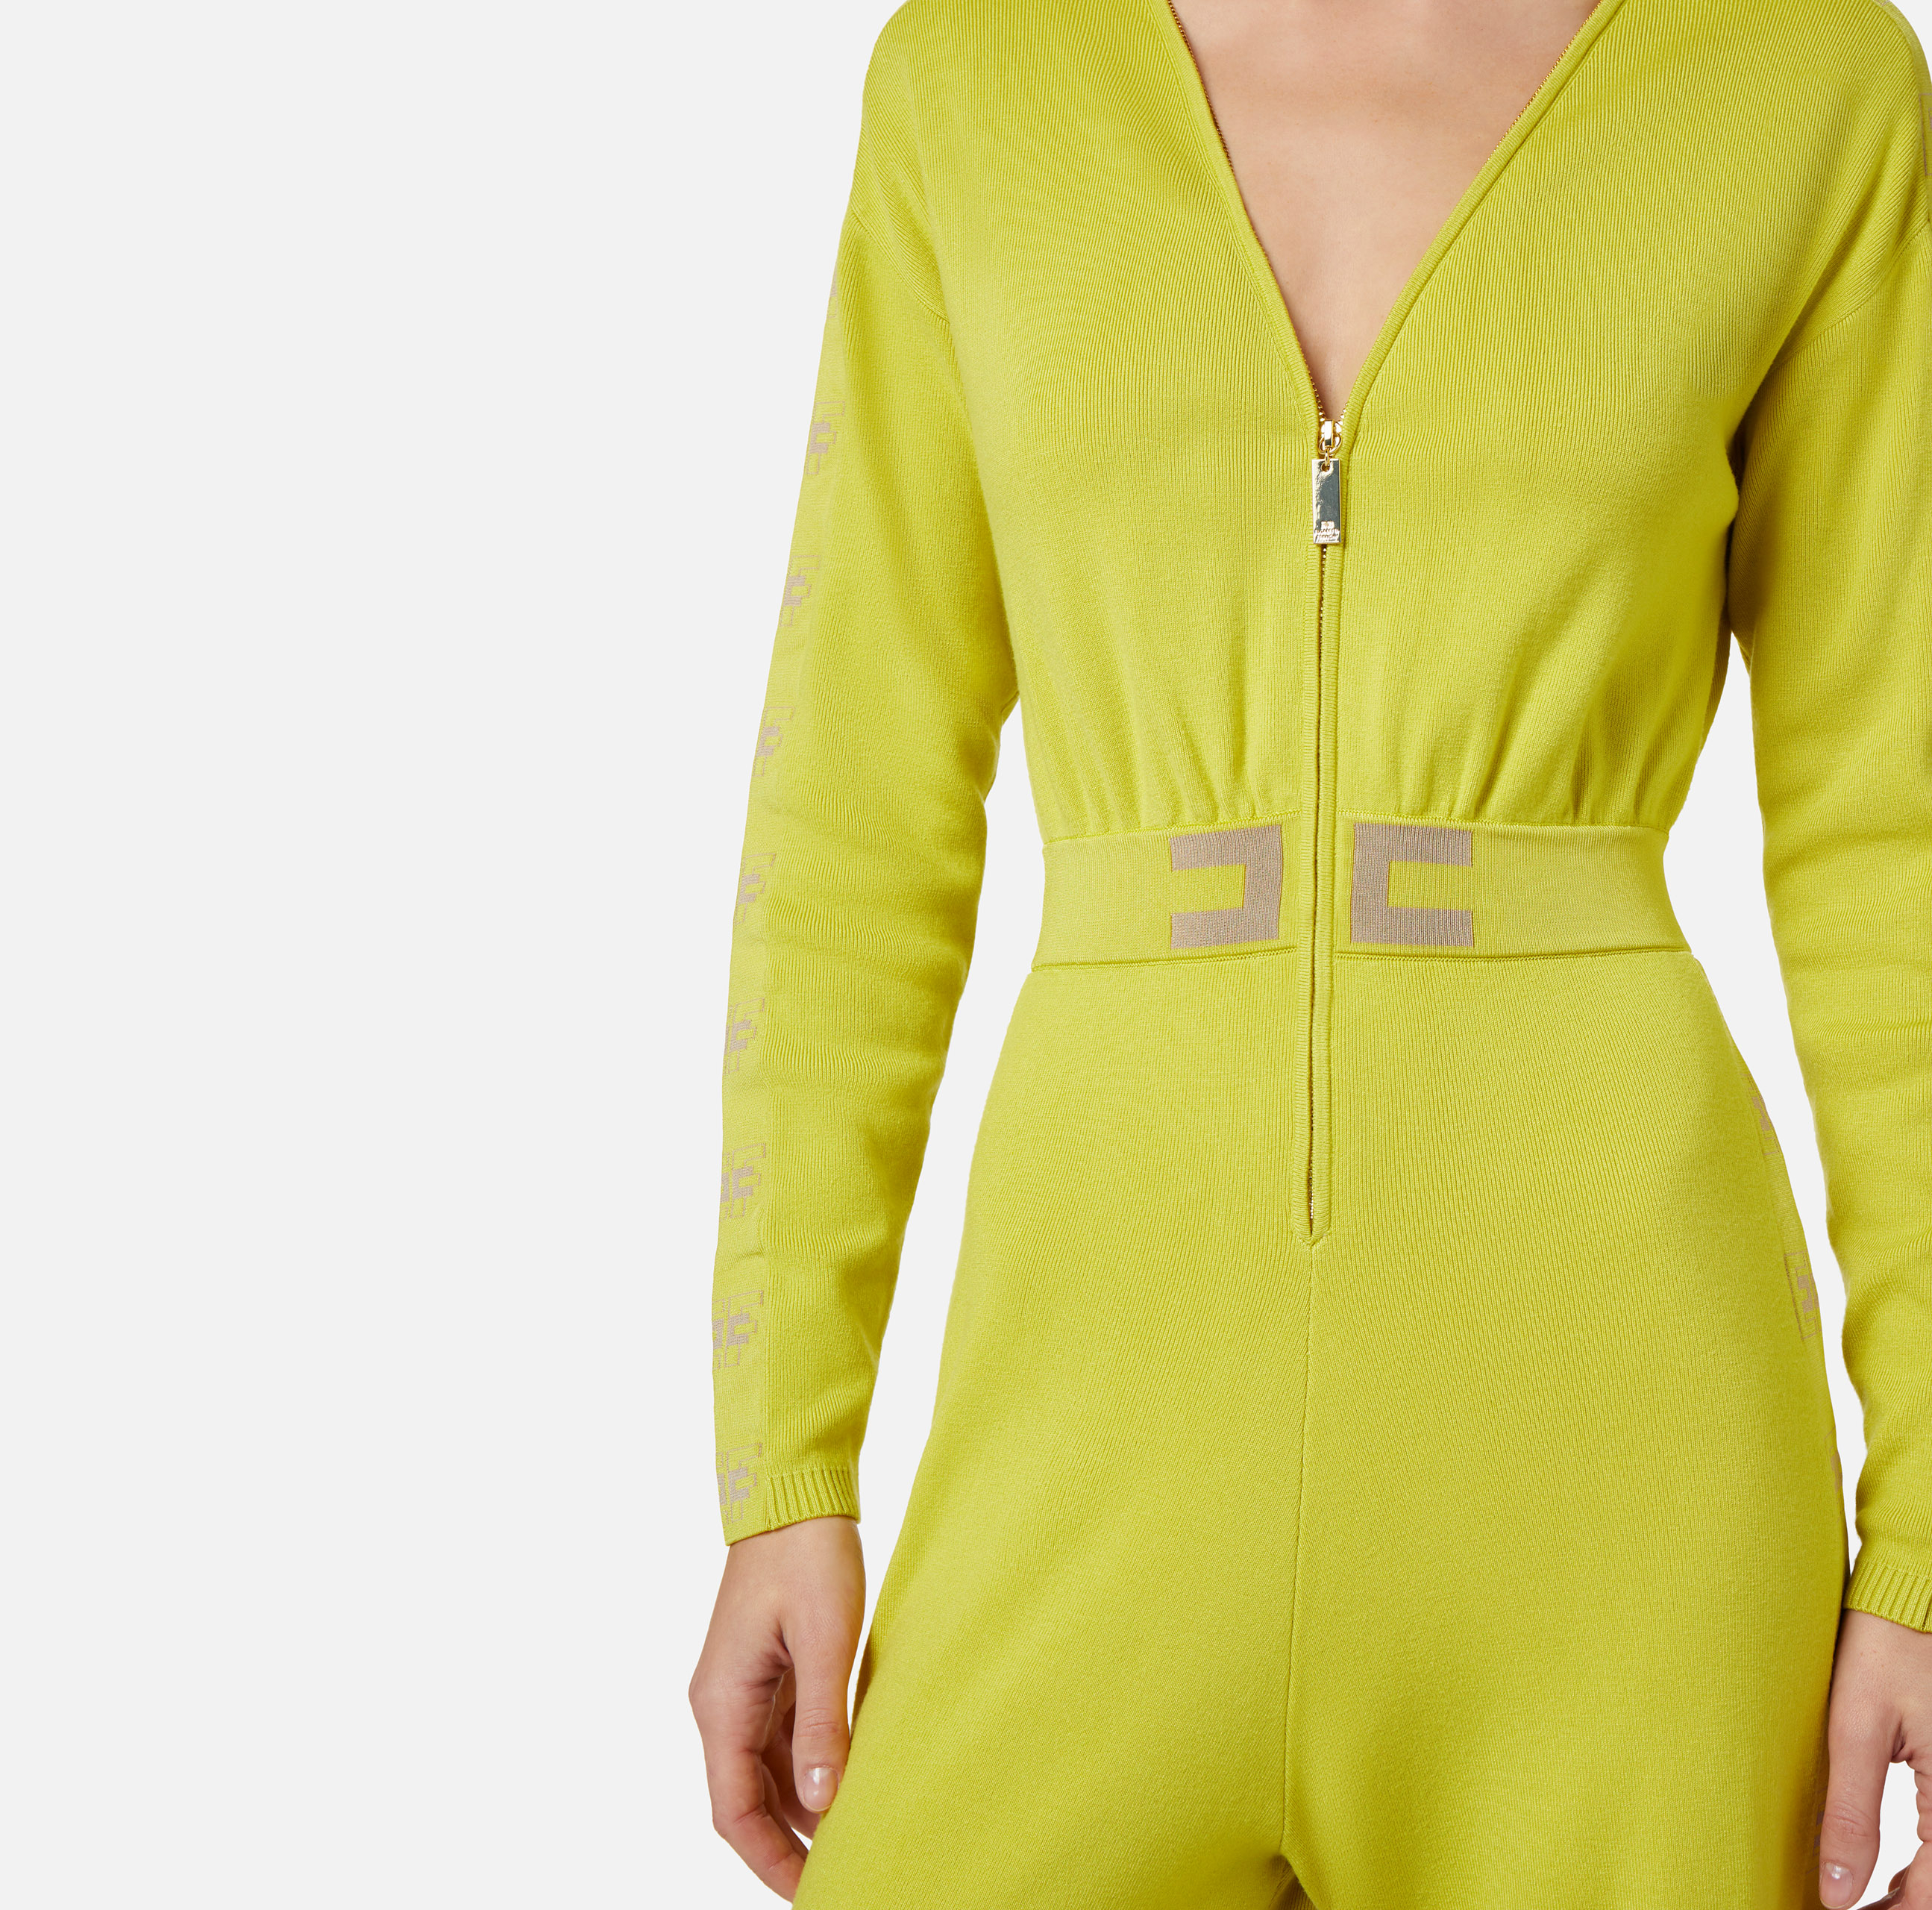 Jumpsuit in cotton fabric with logoed bands - Elisabetta Franchi